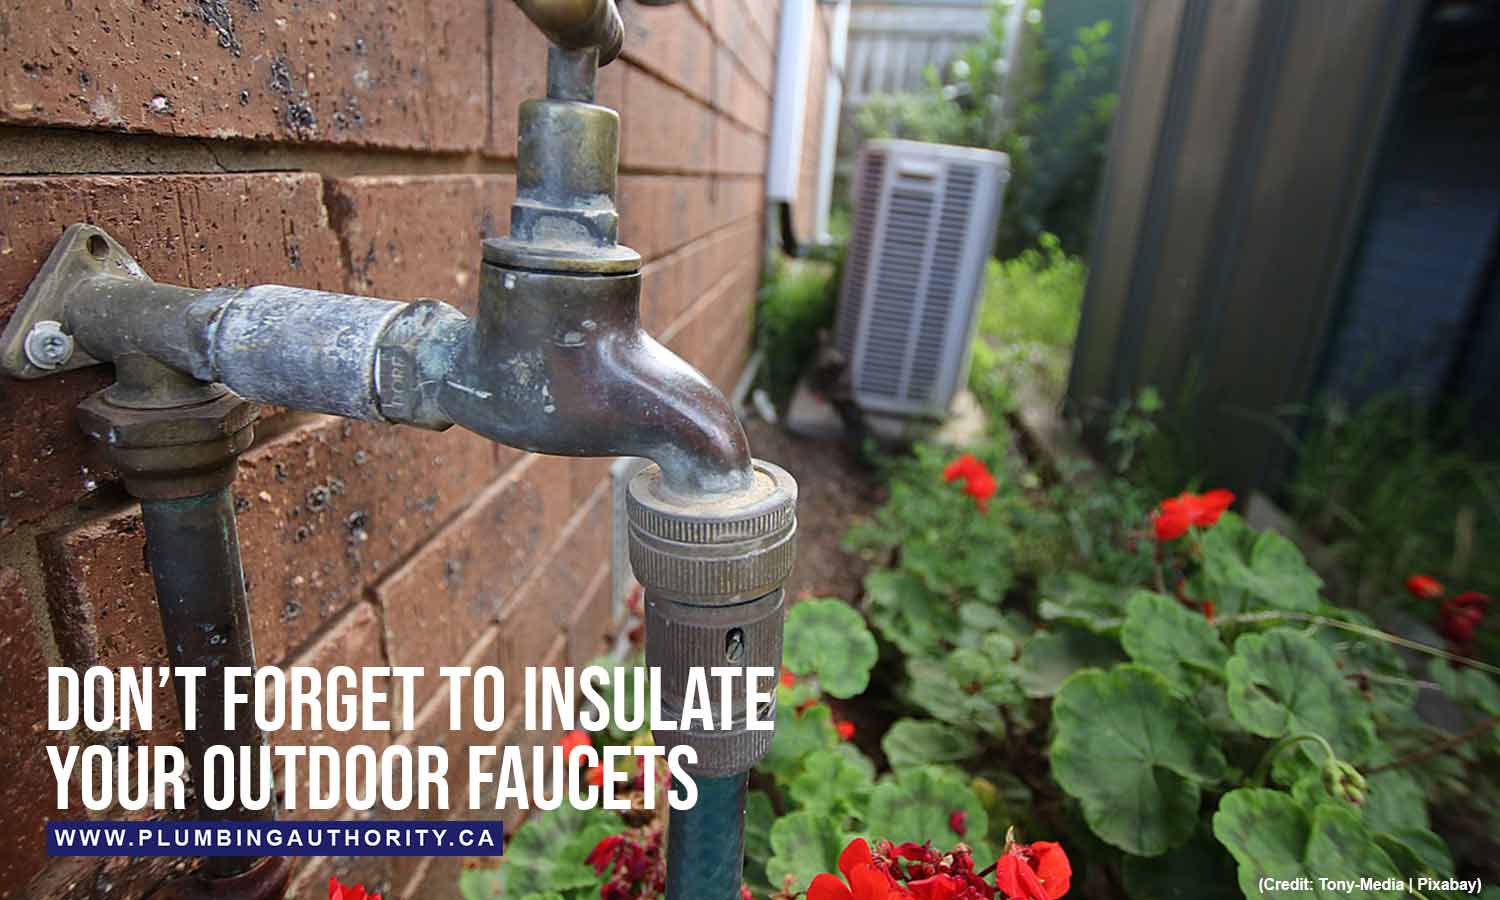 Don’t forget to insulate your outdoor faucets